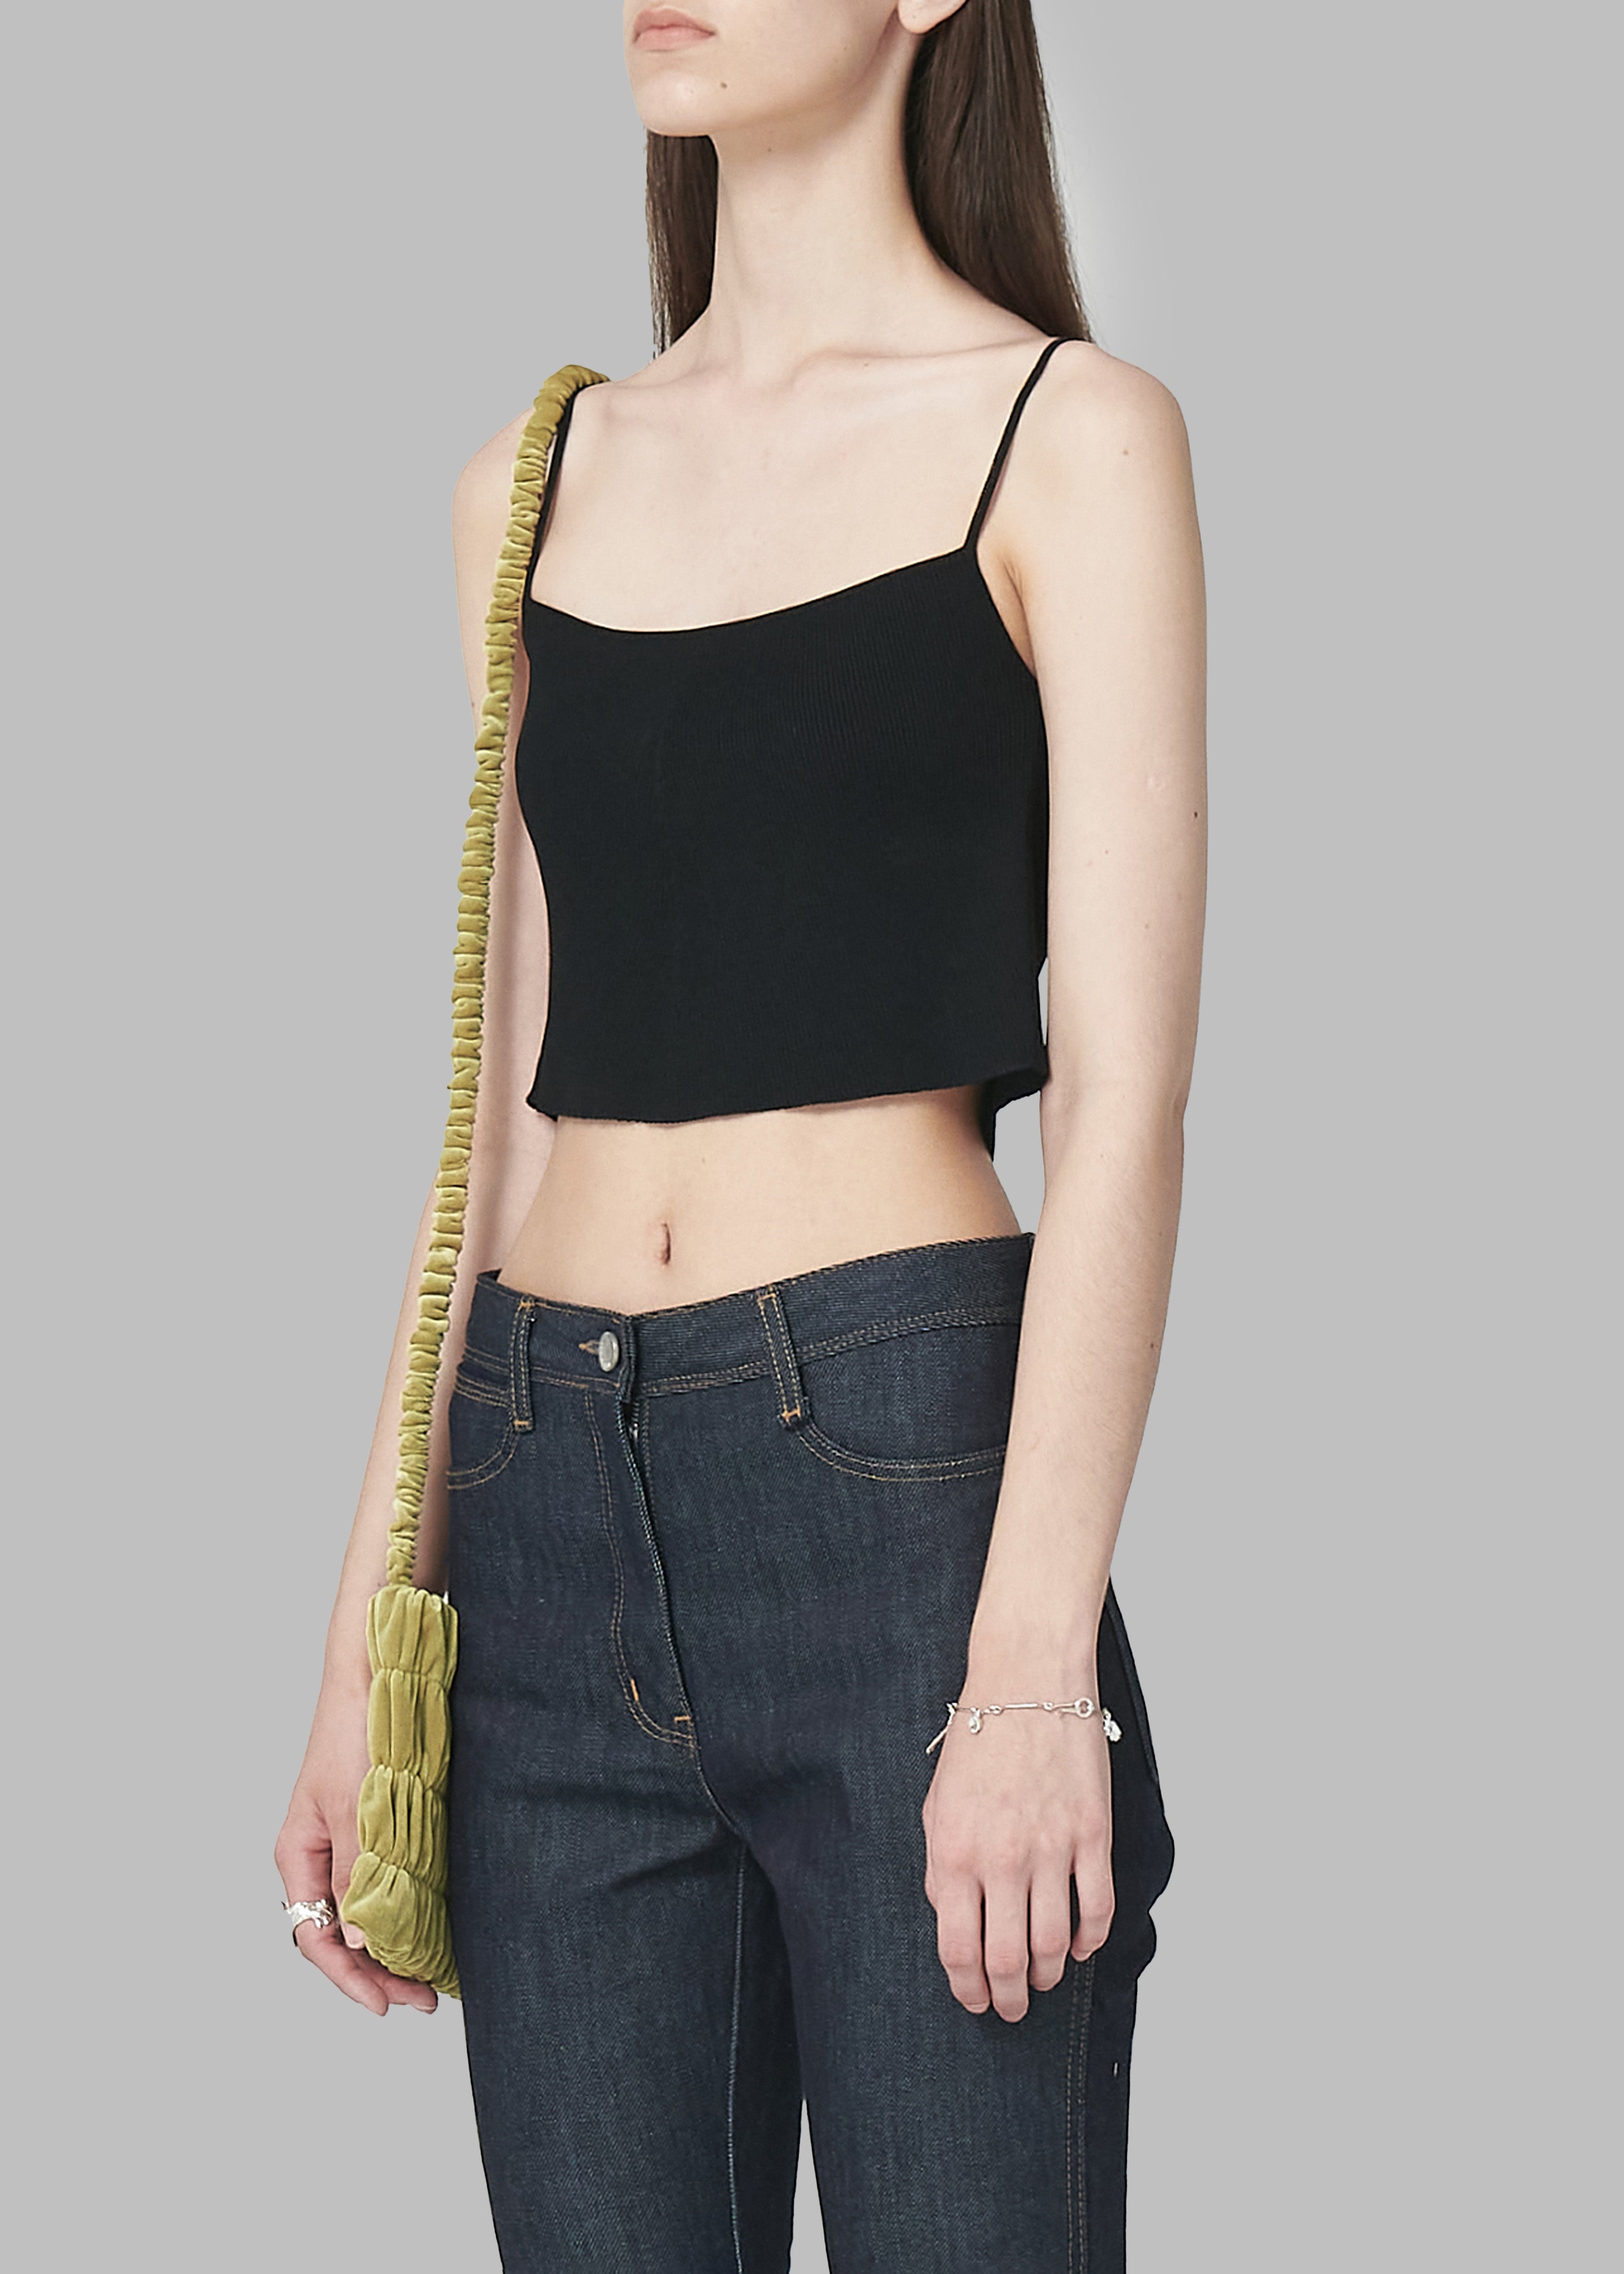 Low Classic Knitted Sleeveless Crop Top - Black - 5